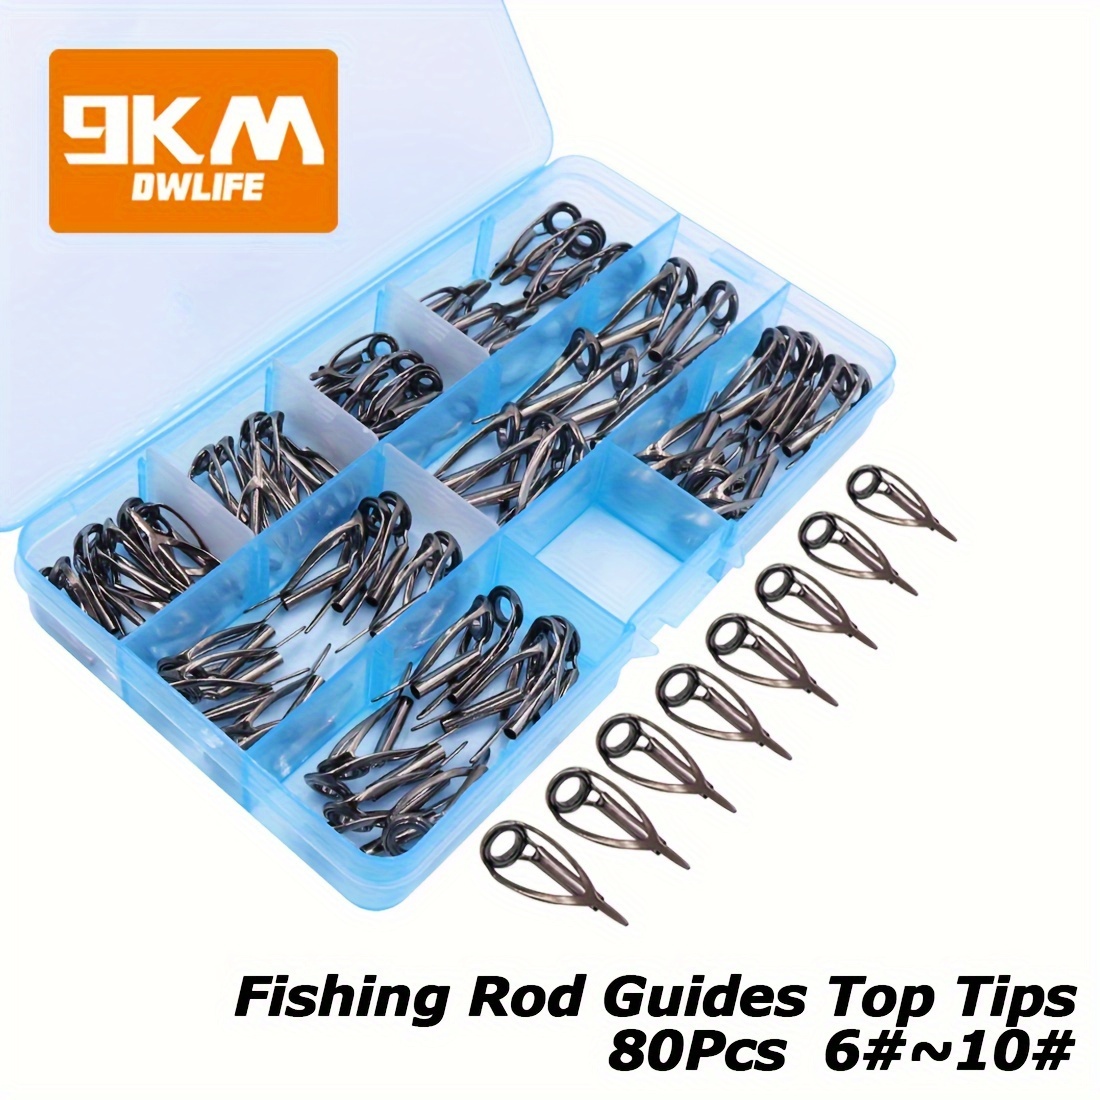  Zsrivk 75Pcs 8 Sizes Fishing Rod Repair kit, Ceramic Guide  Ring Replacement Kit, Stainless Steel Fishing Rod Guides for Repairing  Fishing Pole Top Eyelets : Sports & Outdoors